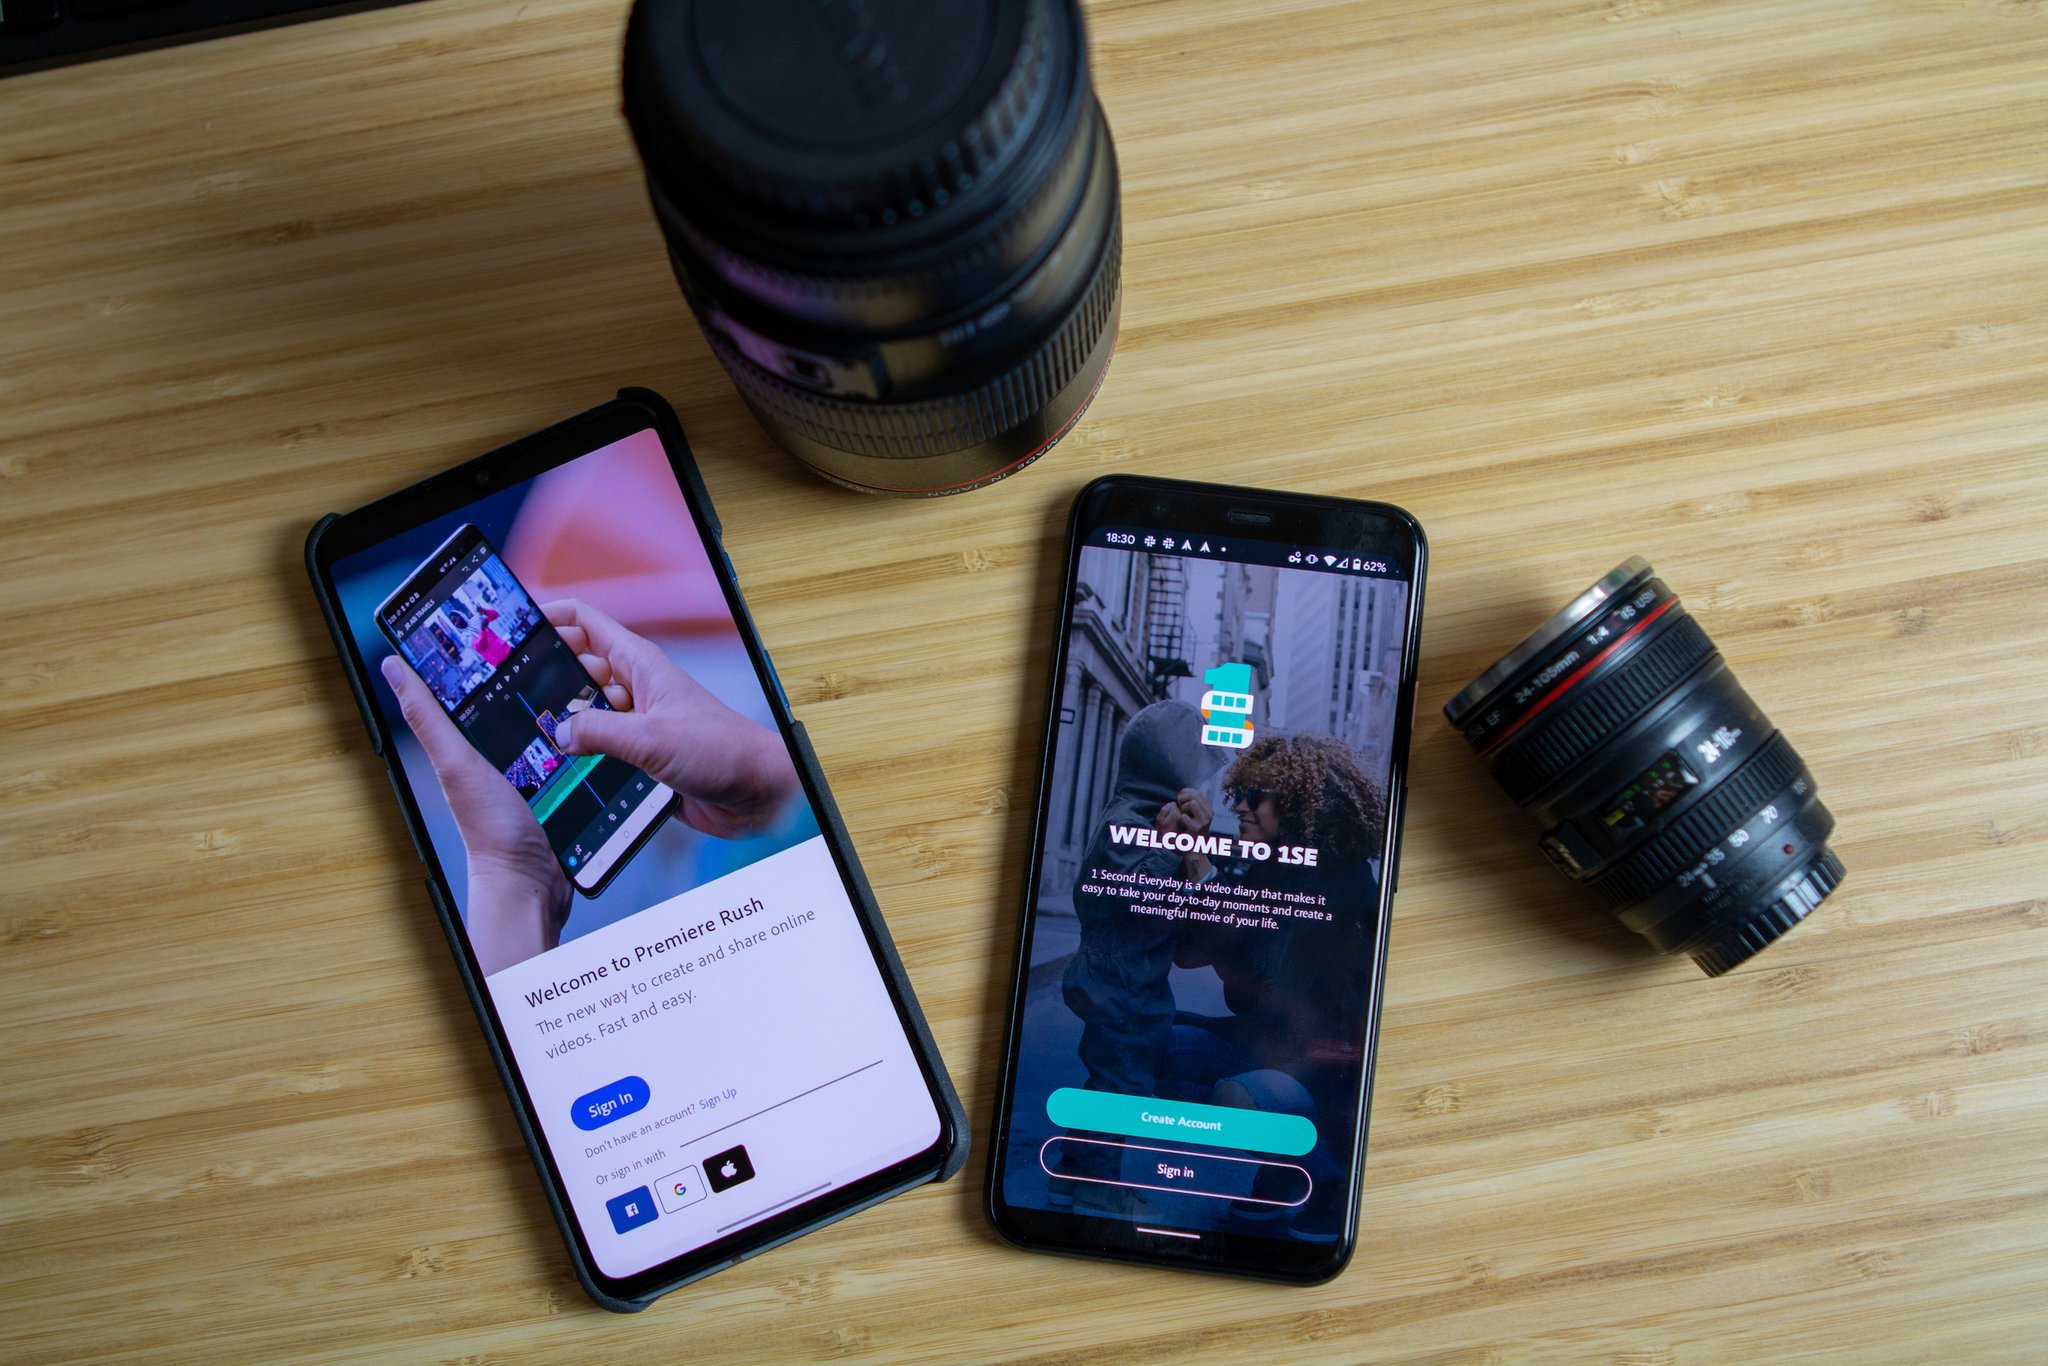 Record and edit those videos right from your phone with these apps thumbnail